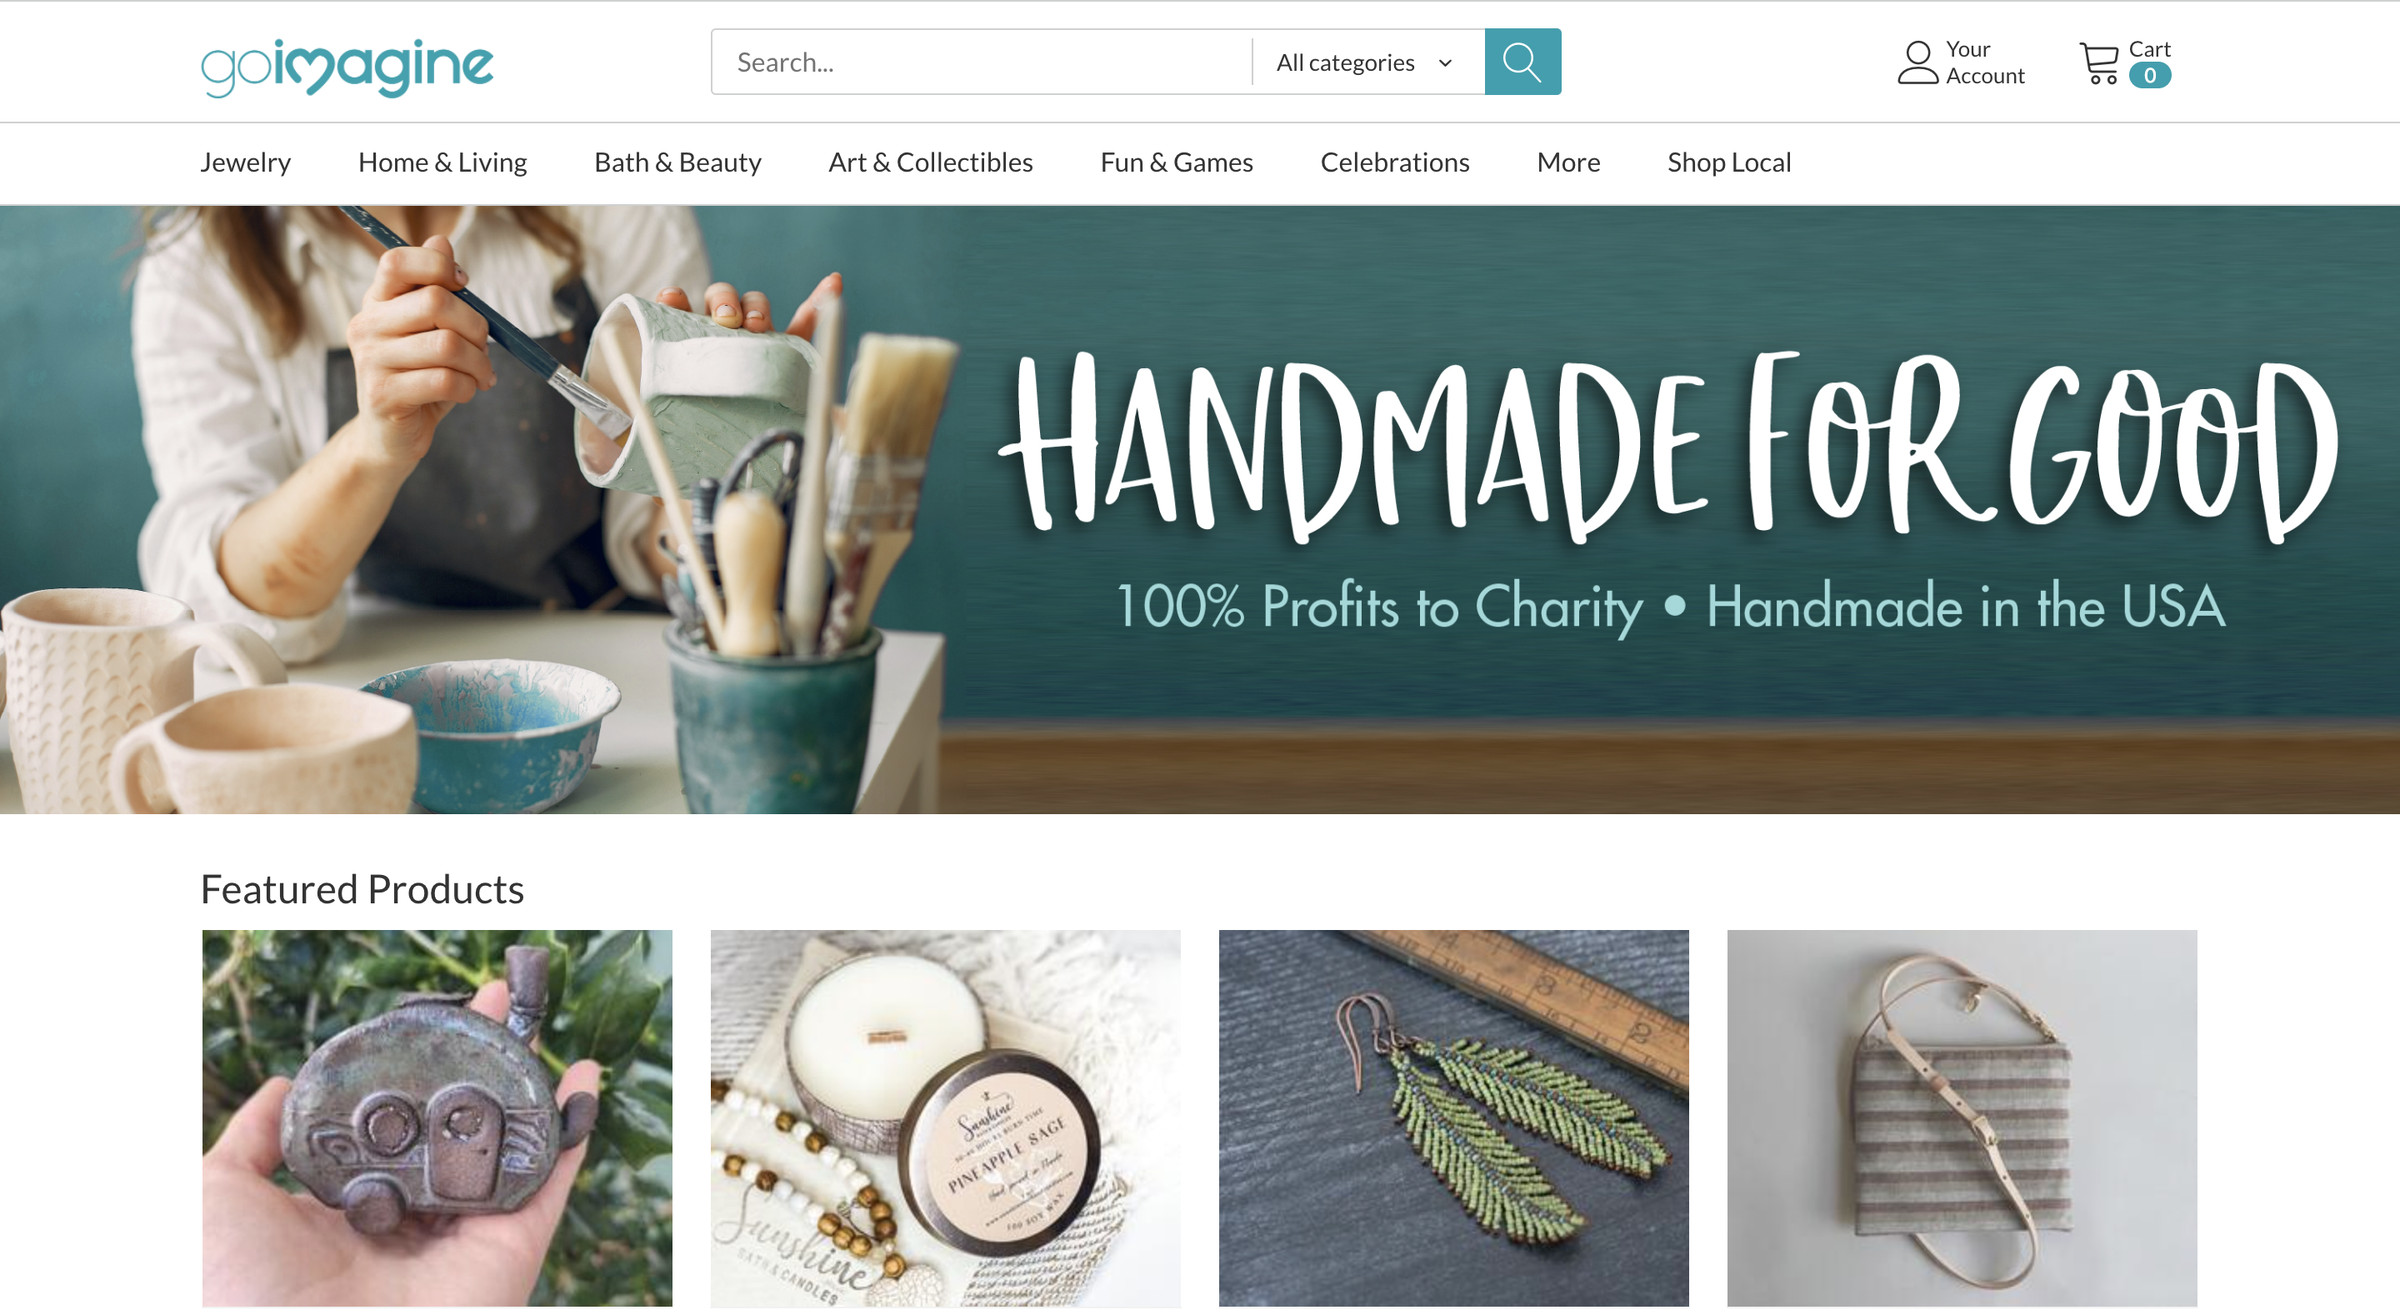 The Goimagine front page with the title “Handmade for Good” showing a photo of a person painting a handmade mug, and below it four square photos of various products.